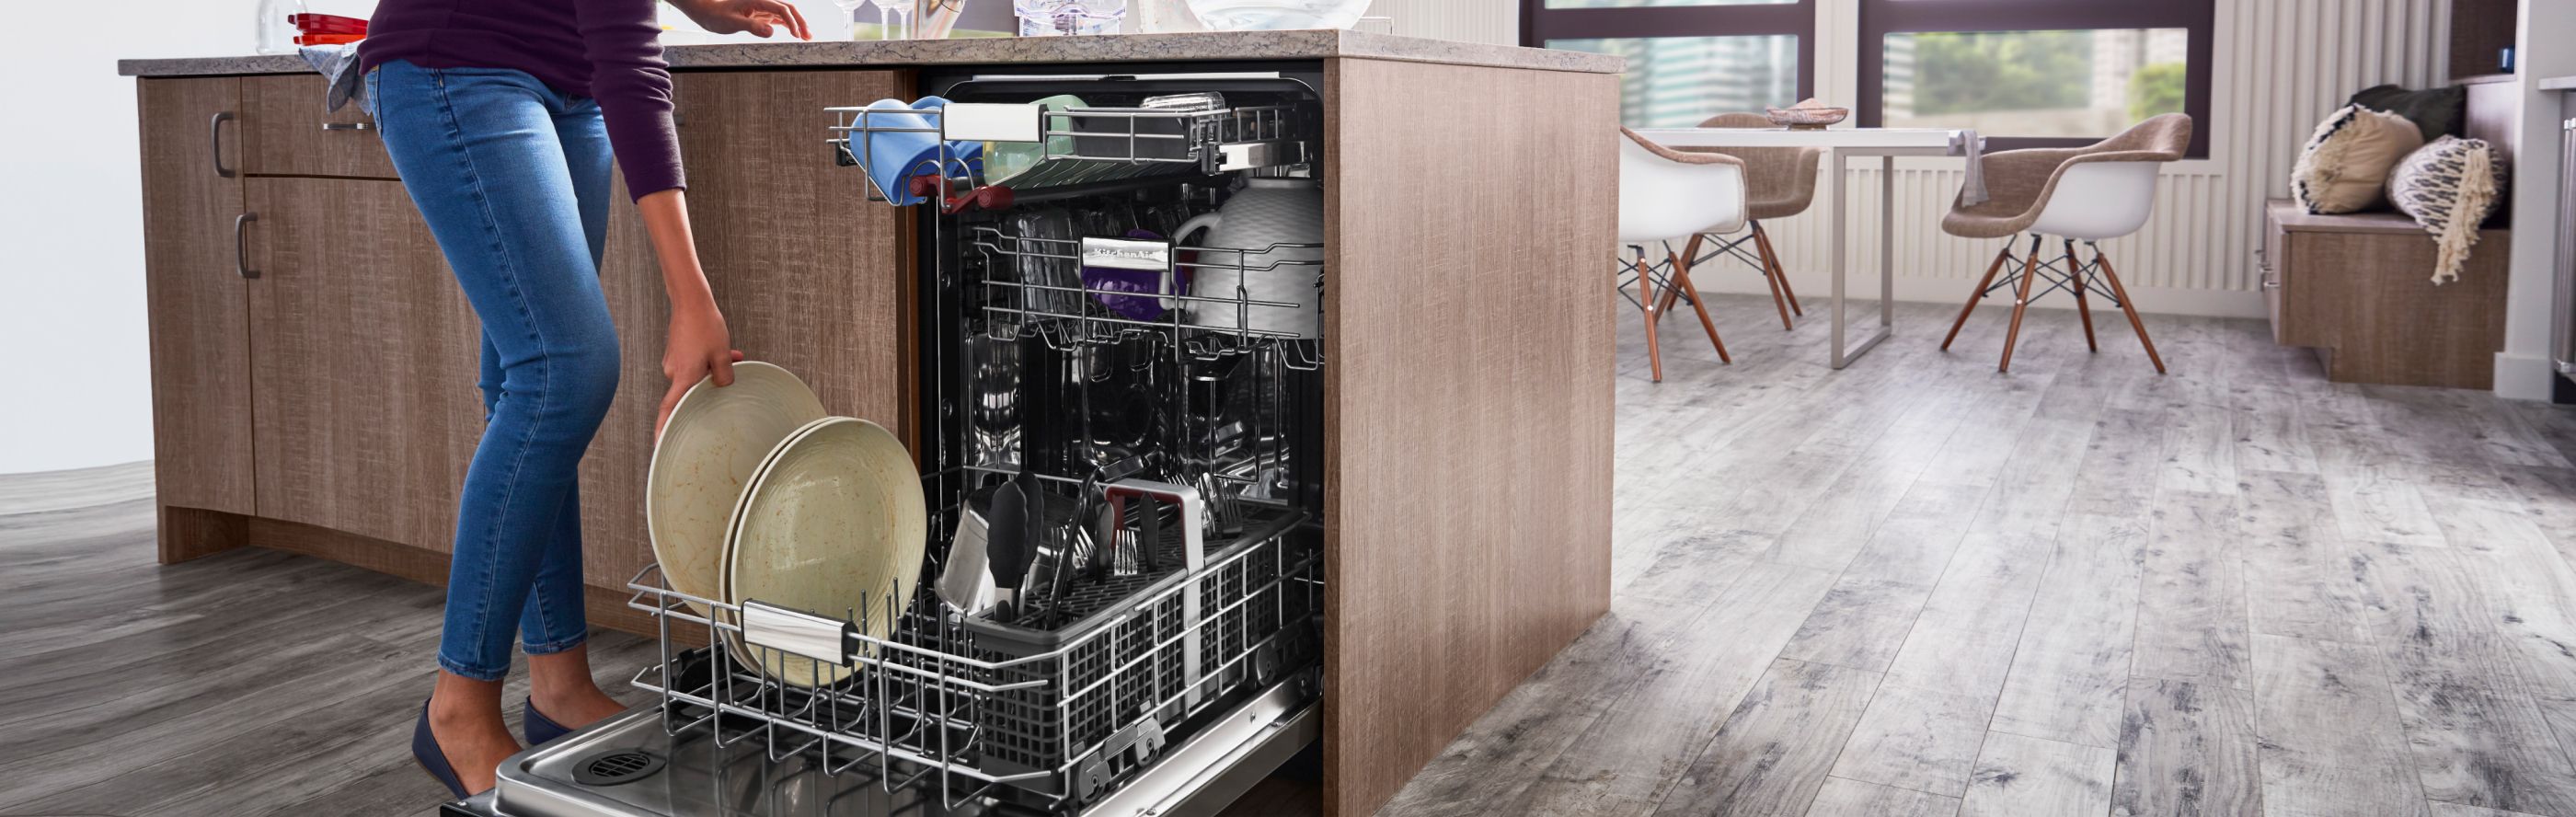 Woman loading dishes into a dishwasher